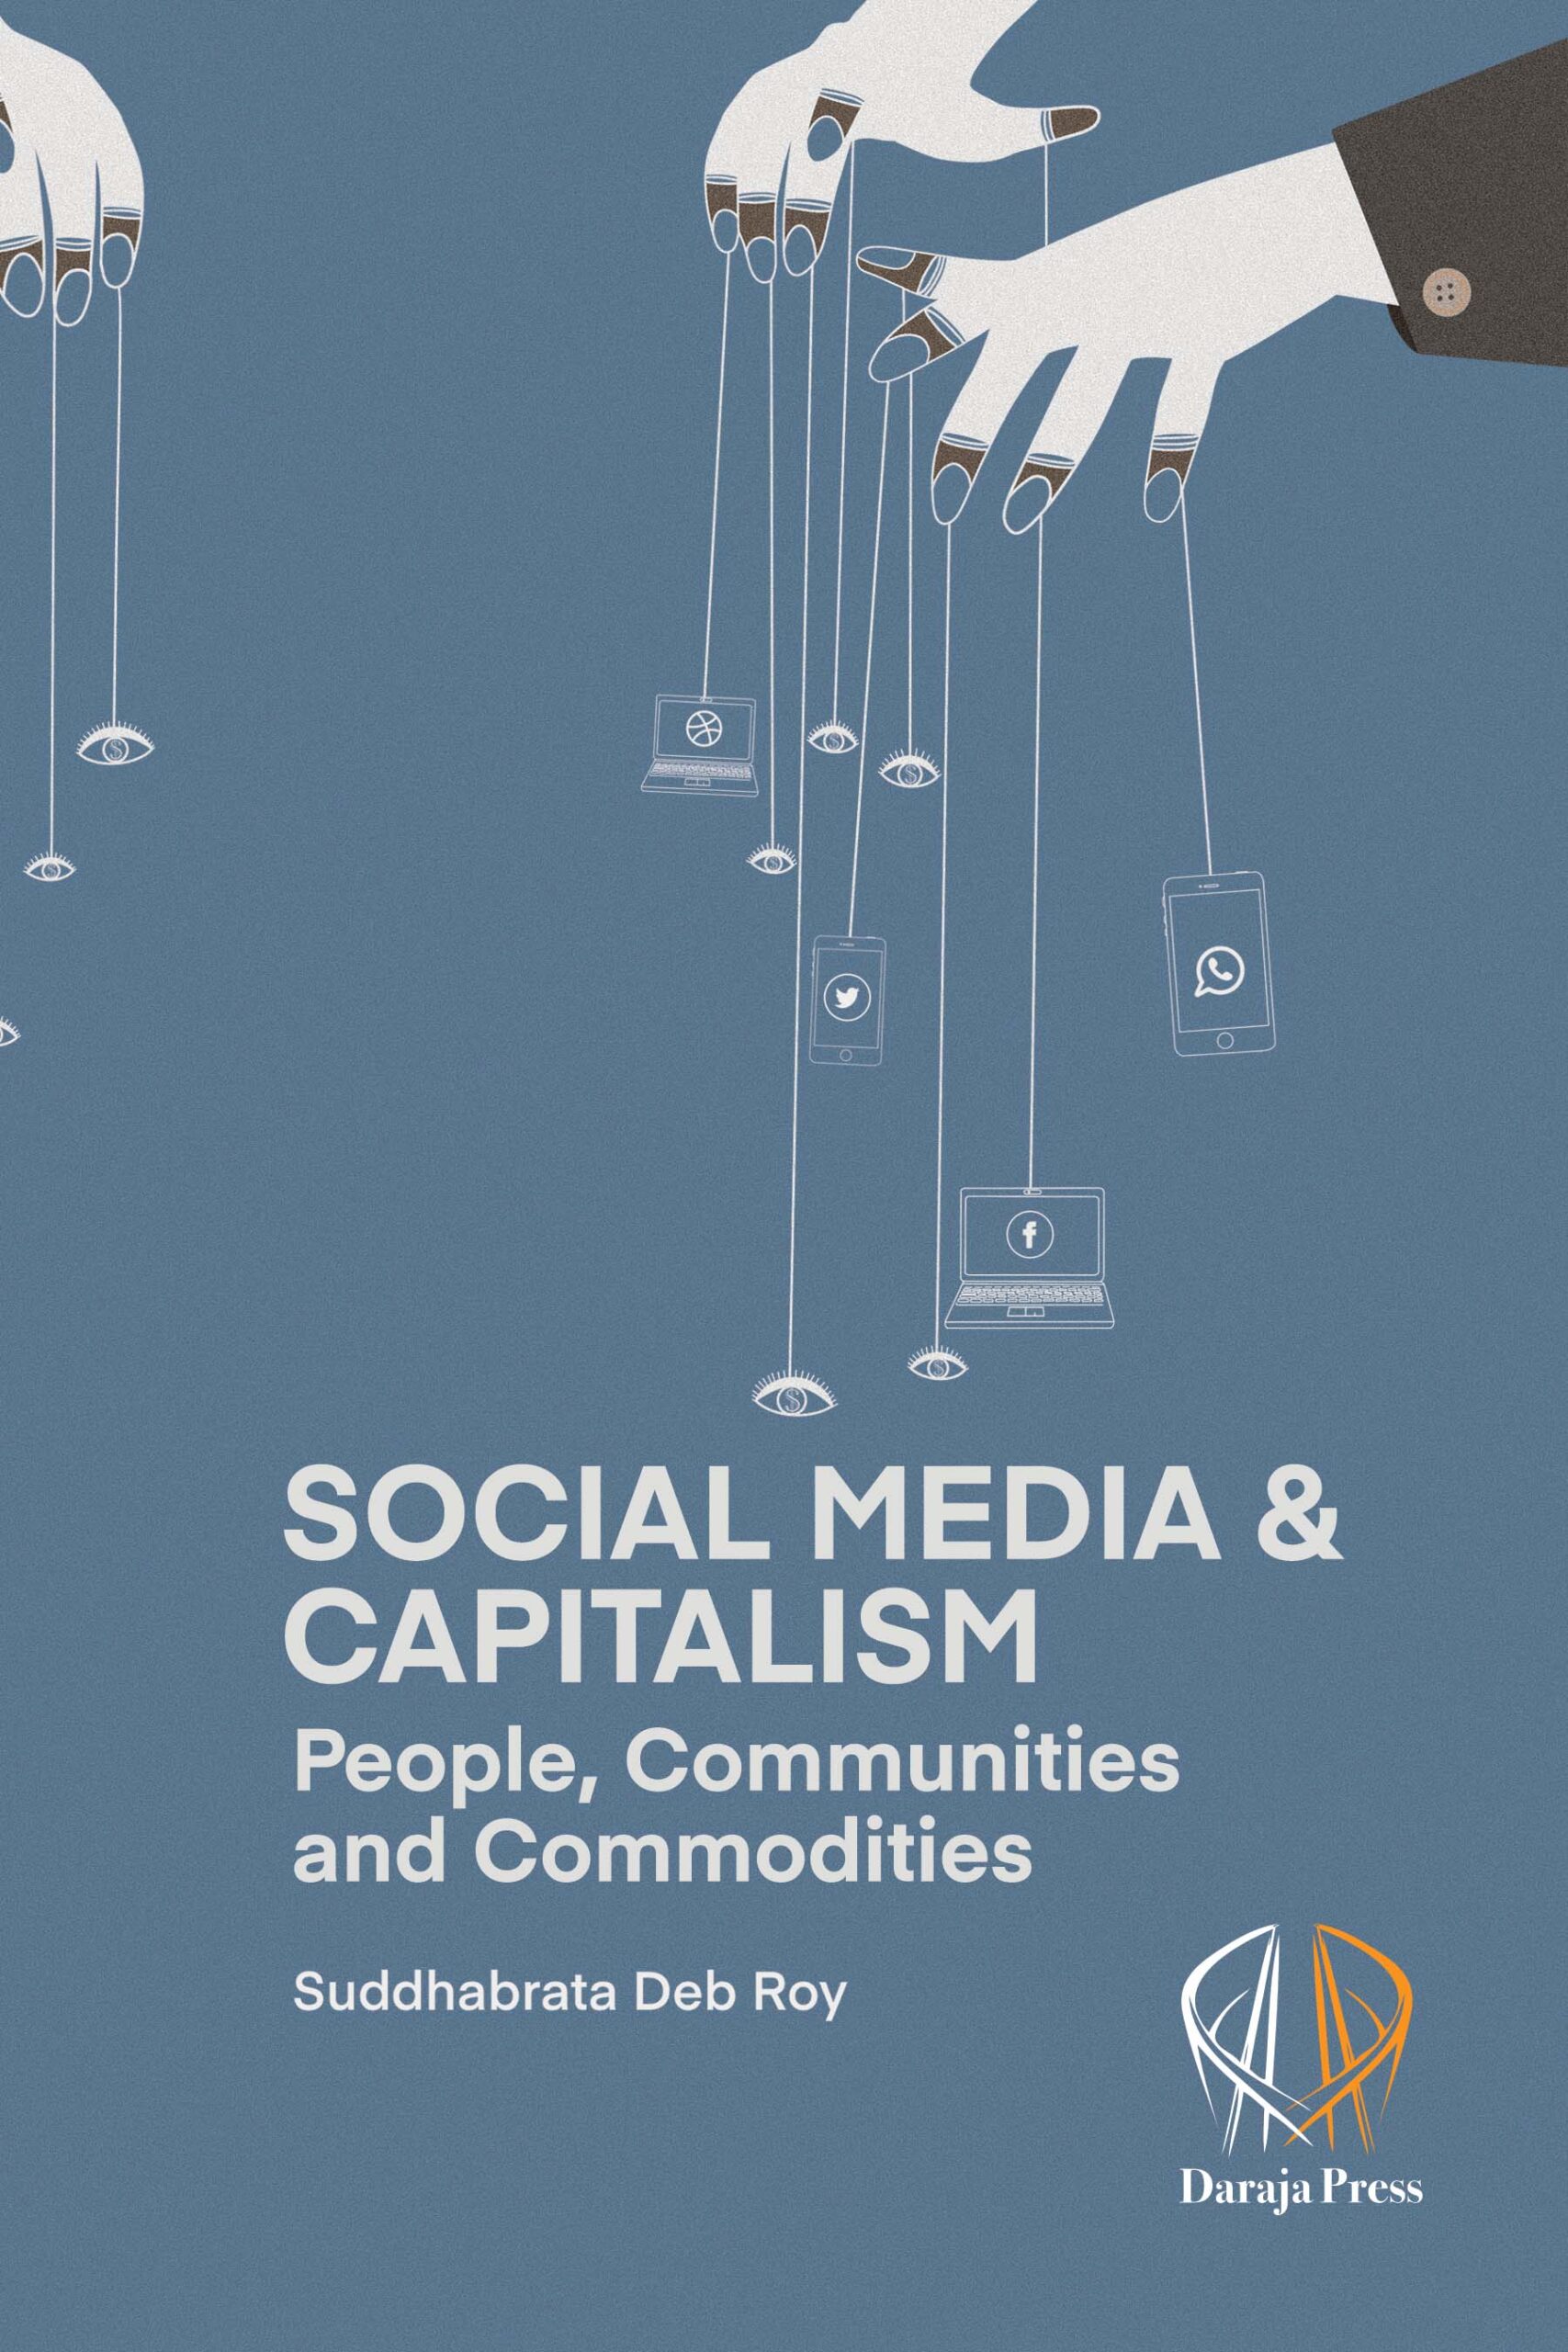 Containing Community: From Political Economy to Ontology in